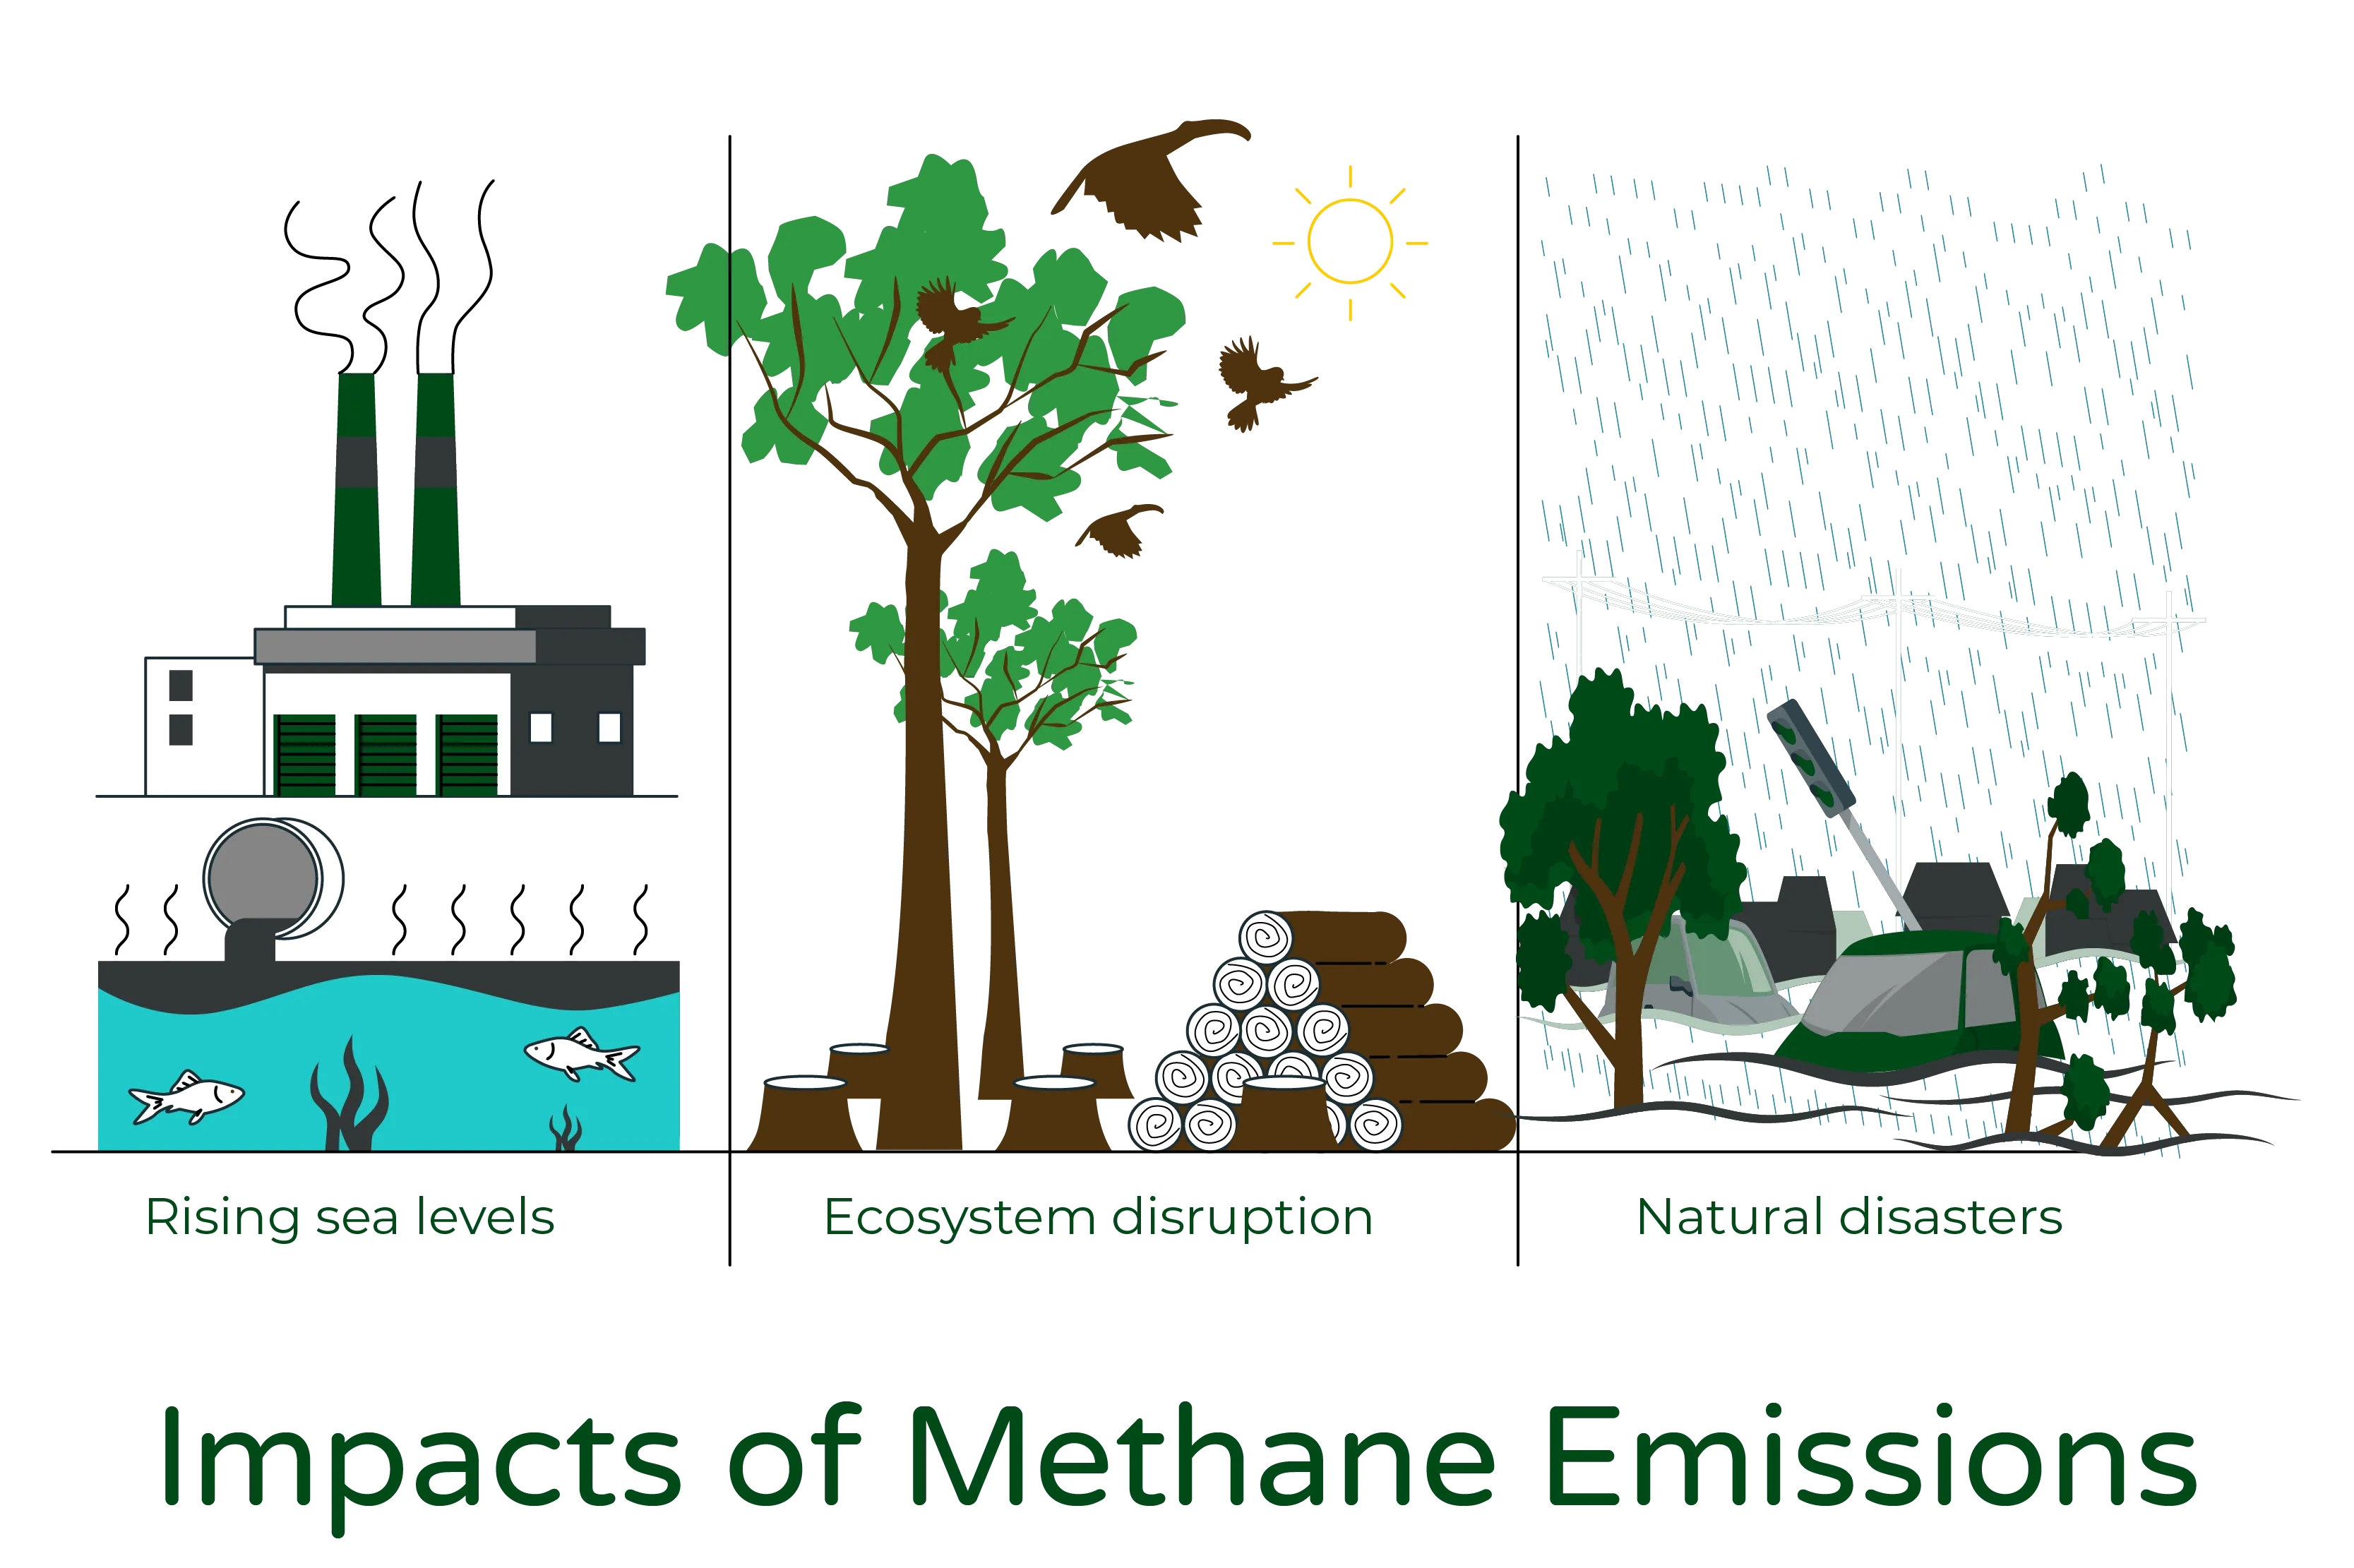 Illustration titled 'Impacts of Methane Emission.' The image showcases three distinct scenarios highlighting the detrimental effects of methane emissions. In the first scenario, an industrial facility is depicted with polluted water being discharged directly into the sea. This visually represents the harmful impact on marine life, as well as the consequences of rising sea levels attributed to methane emissions.  Moving to the second scenario, the illustration portrays a scene where trees are being cut down, symbolizing deforestation. As a result, birds are shown flying away, illustrating the disruption of ecosystems caused by methane emissions. This scenario serves as a reminder of the far-reaching consequences of human activities on the natural world.  Finally, the third scenario portrays a flooded area with a car submerged in water alongside trees. This depiction represents the occurrence of natural disasters triggered by methane emissions, such as severe flooding. The inclusion of the car and trees emphasizes the scale of destruction and the potential risks posed to both human infrastructure and the environment.  Overall, the 'Impacts of Methane Emission' illustration underscores the multifaceted consequences of methane emissions across different domains. It draws attention to the ecological disruptions, rising sea levels, and the heightened occurrence of natural disasters associated with methane emissions, urging viewers to consider the urgency of addressing this issue.